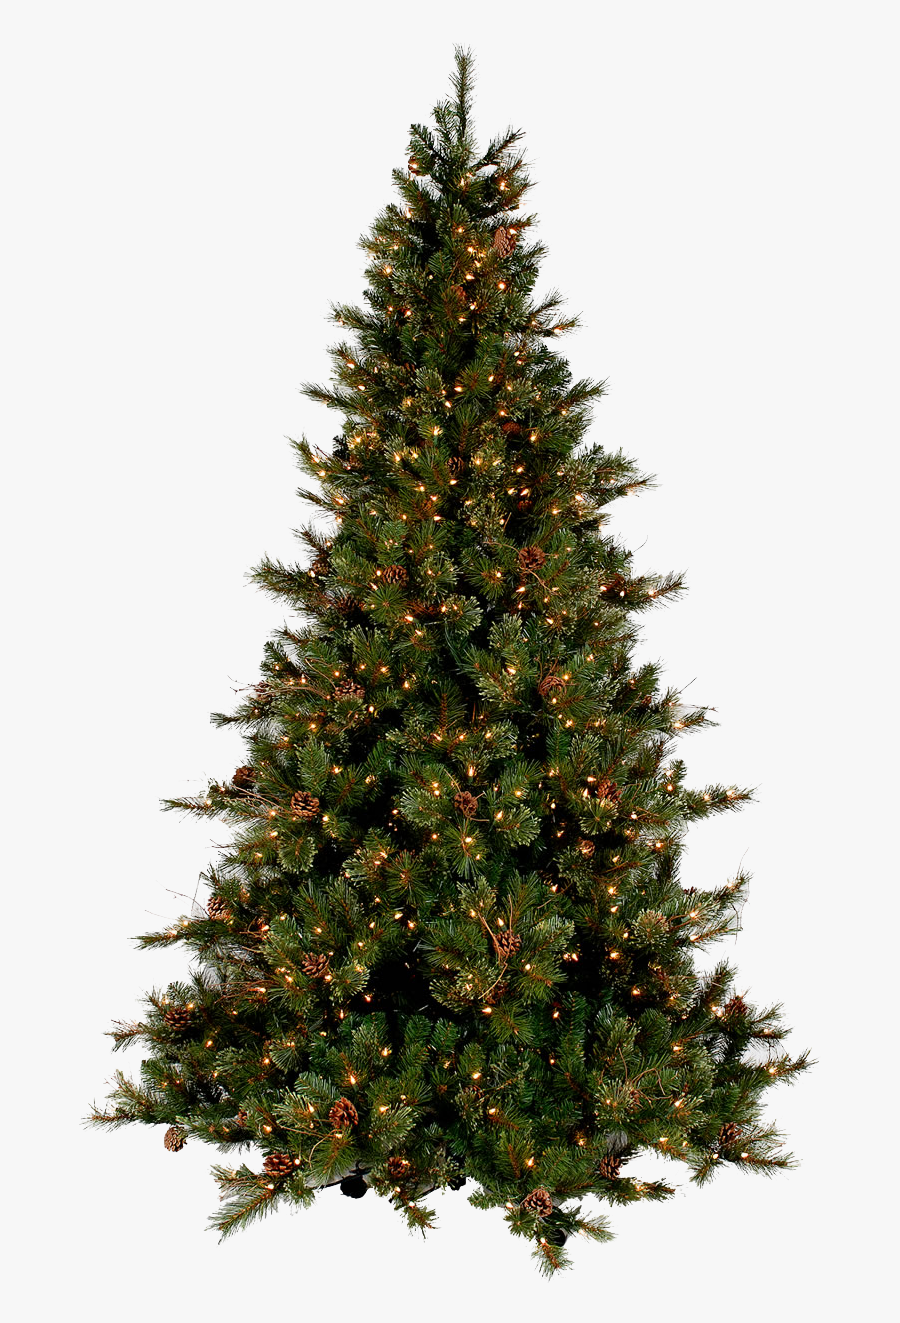 Christmas Tree Png Transparent Background - Real Christmas Tree Png, Transparent Clipart